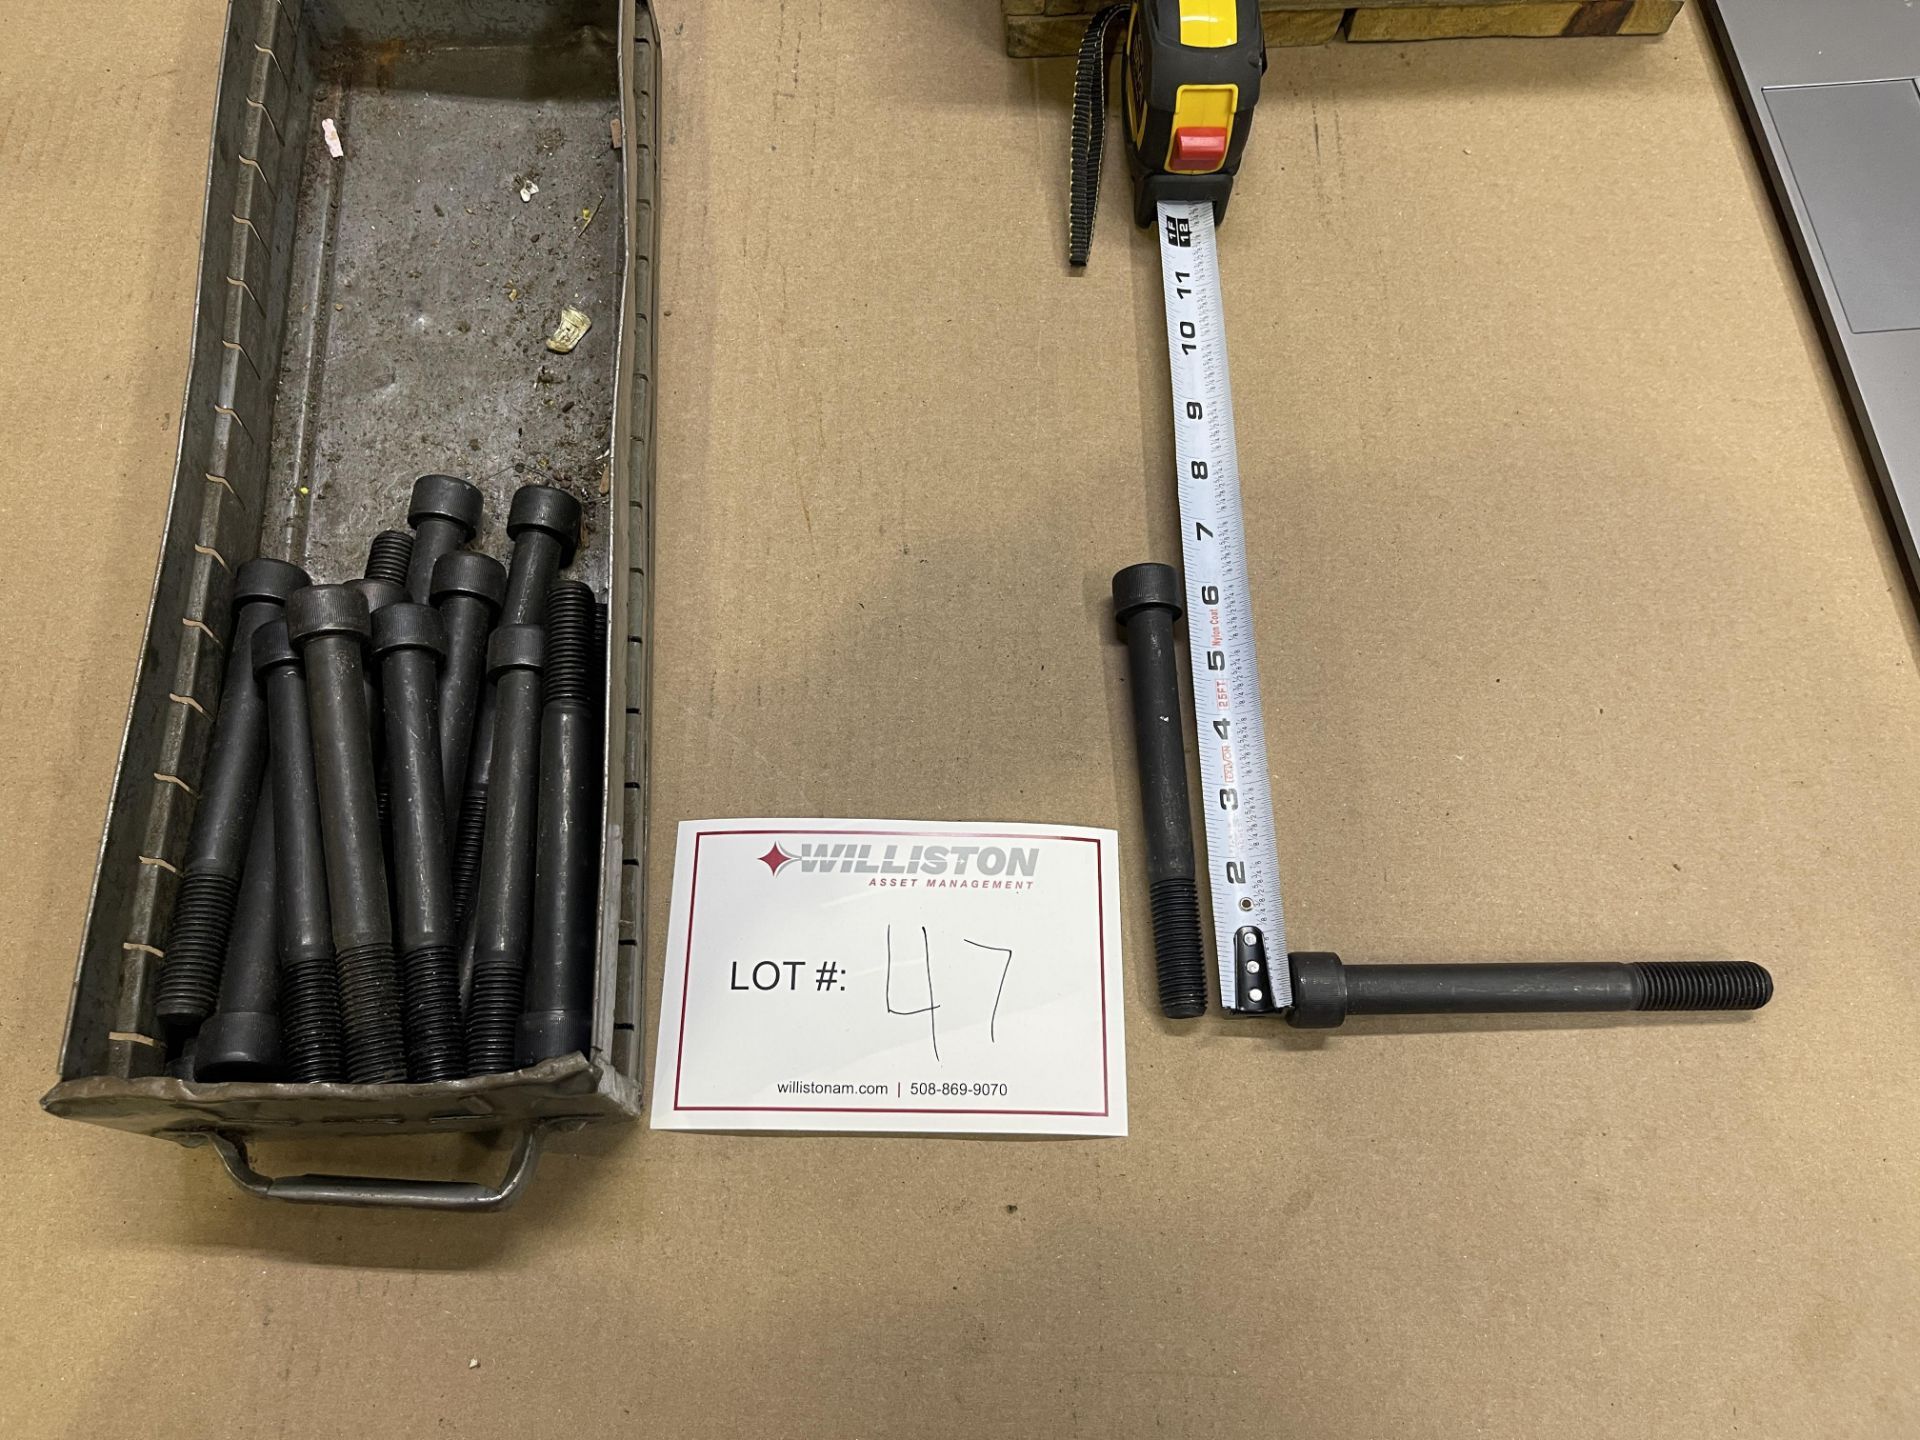 Approx. 15 6" Bolts